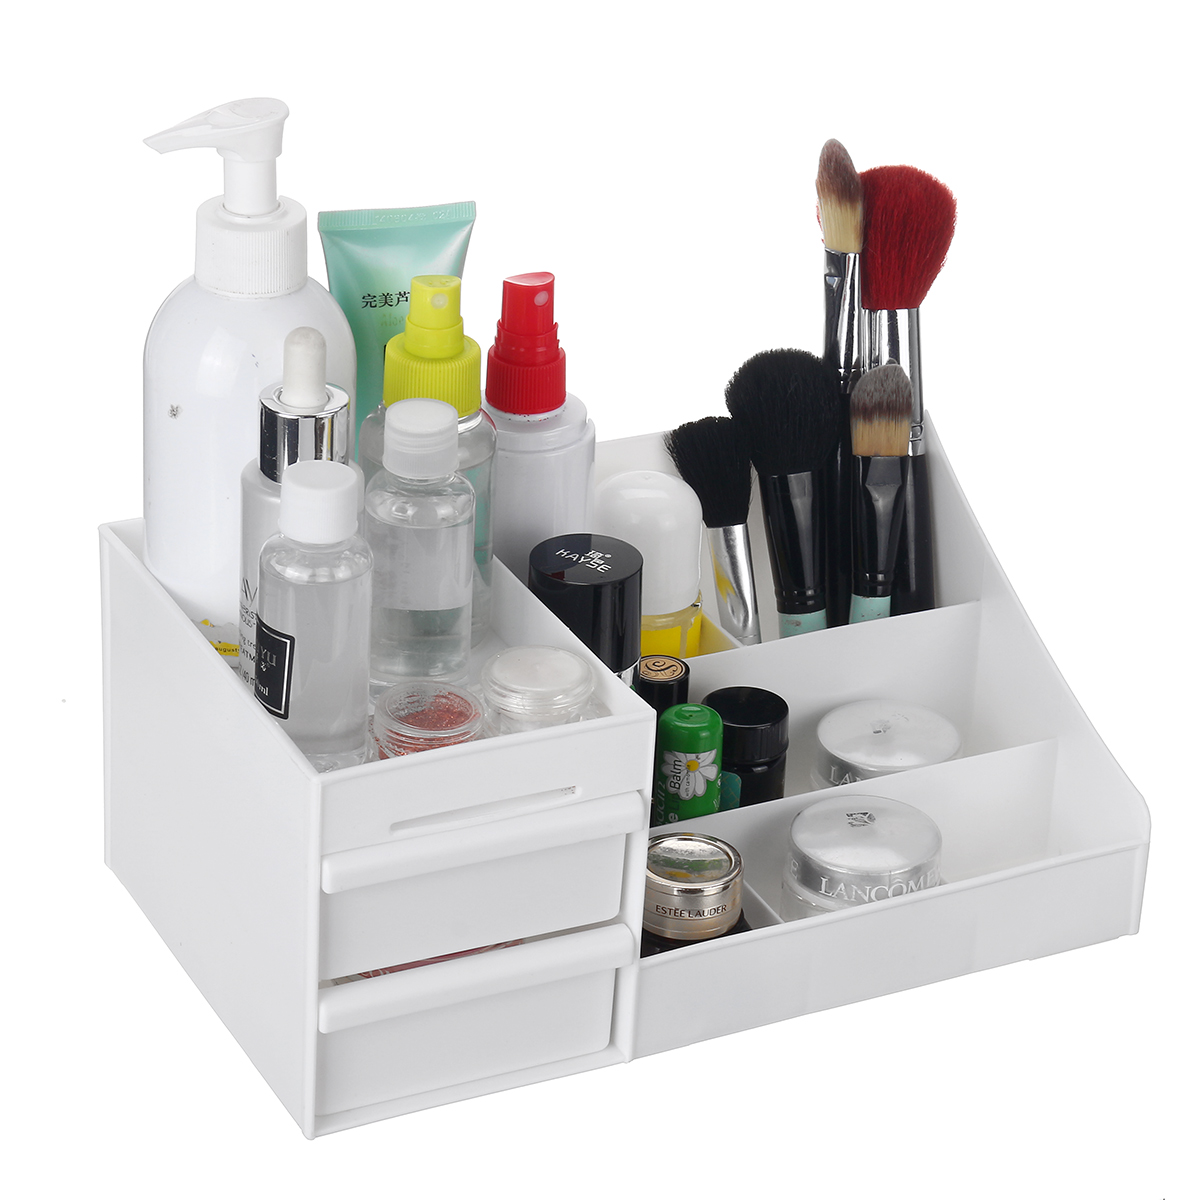 Plastic-Cosmetic-Makeup-Storage-Box-Organizer-Case-Holder-Jewelry-with-Drawer-1700918-4